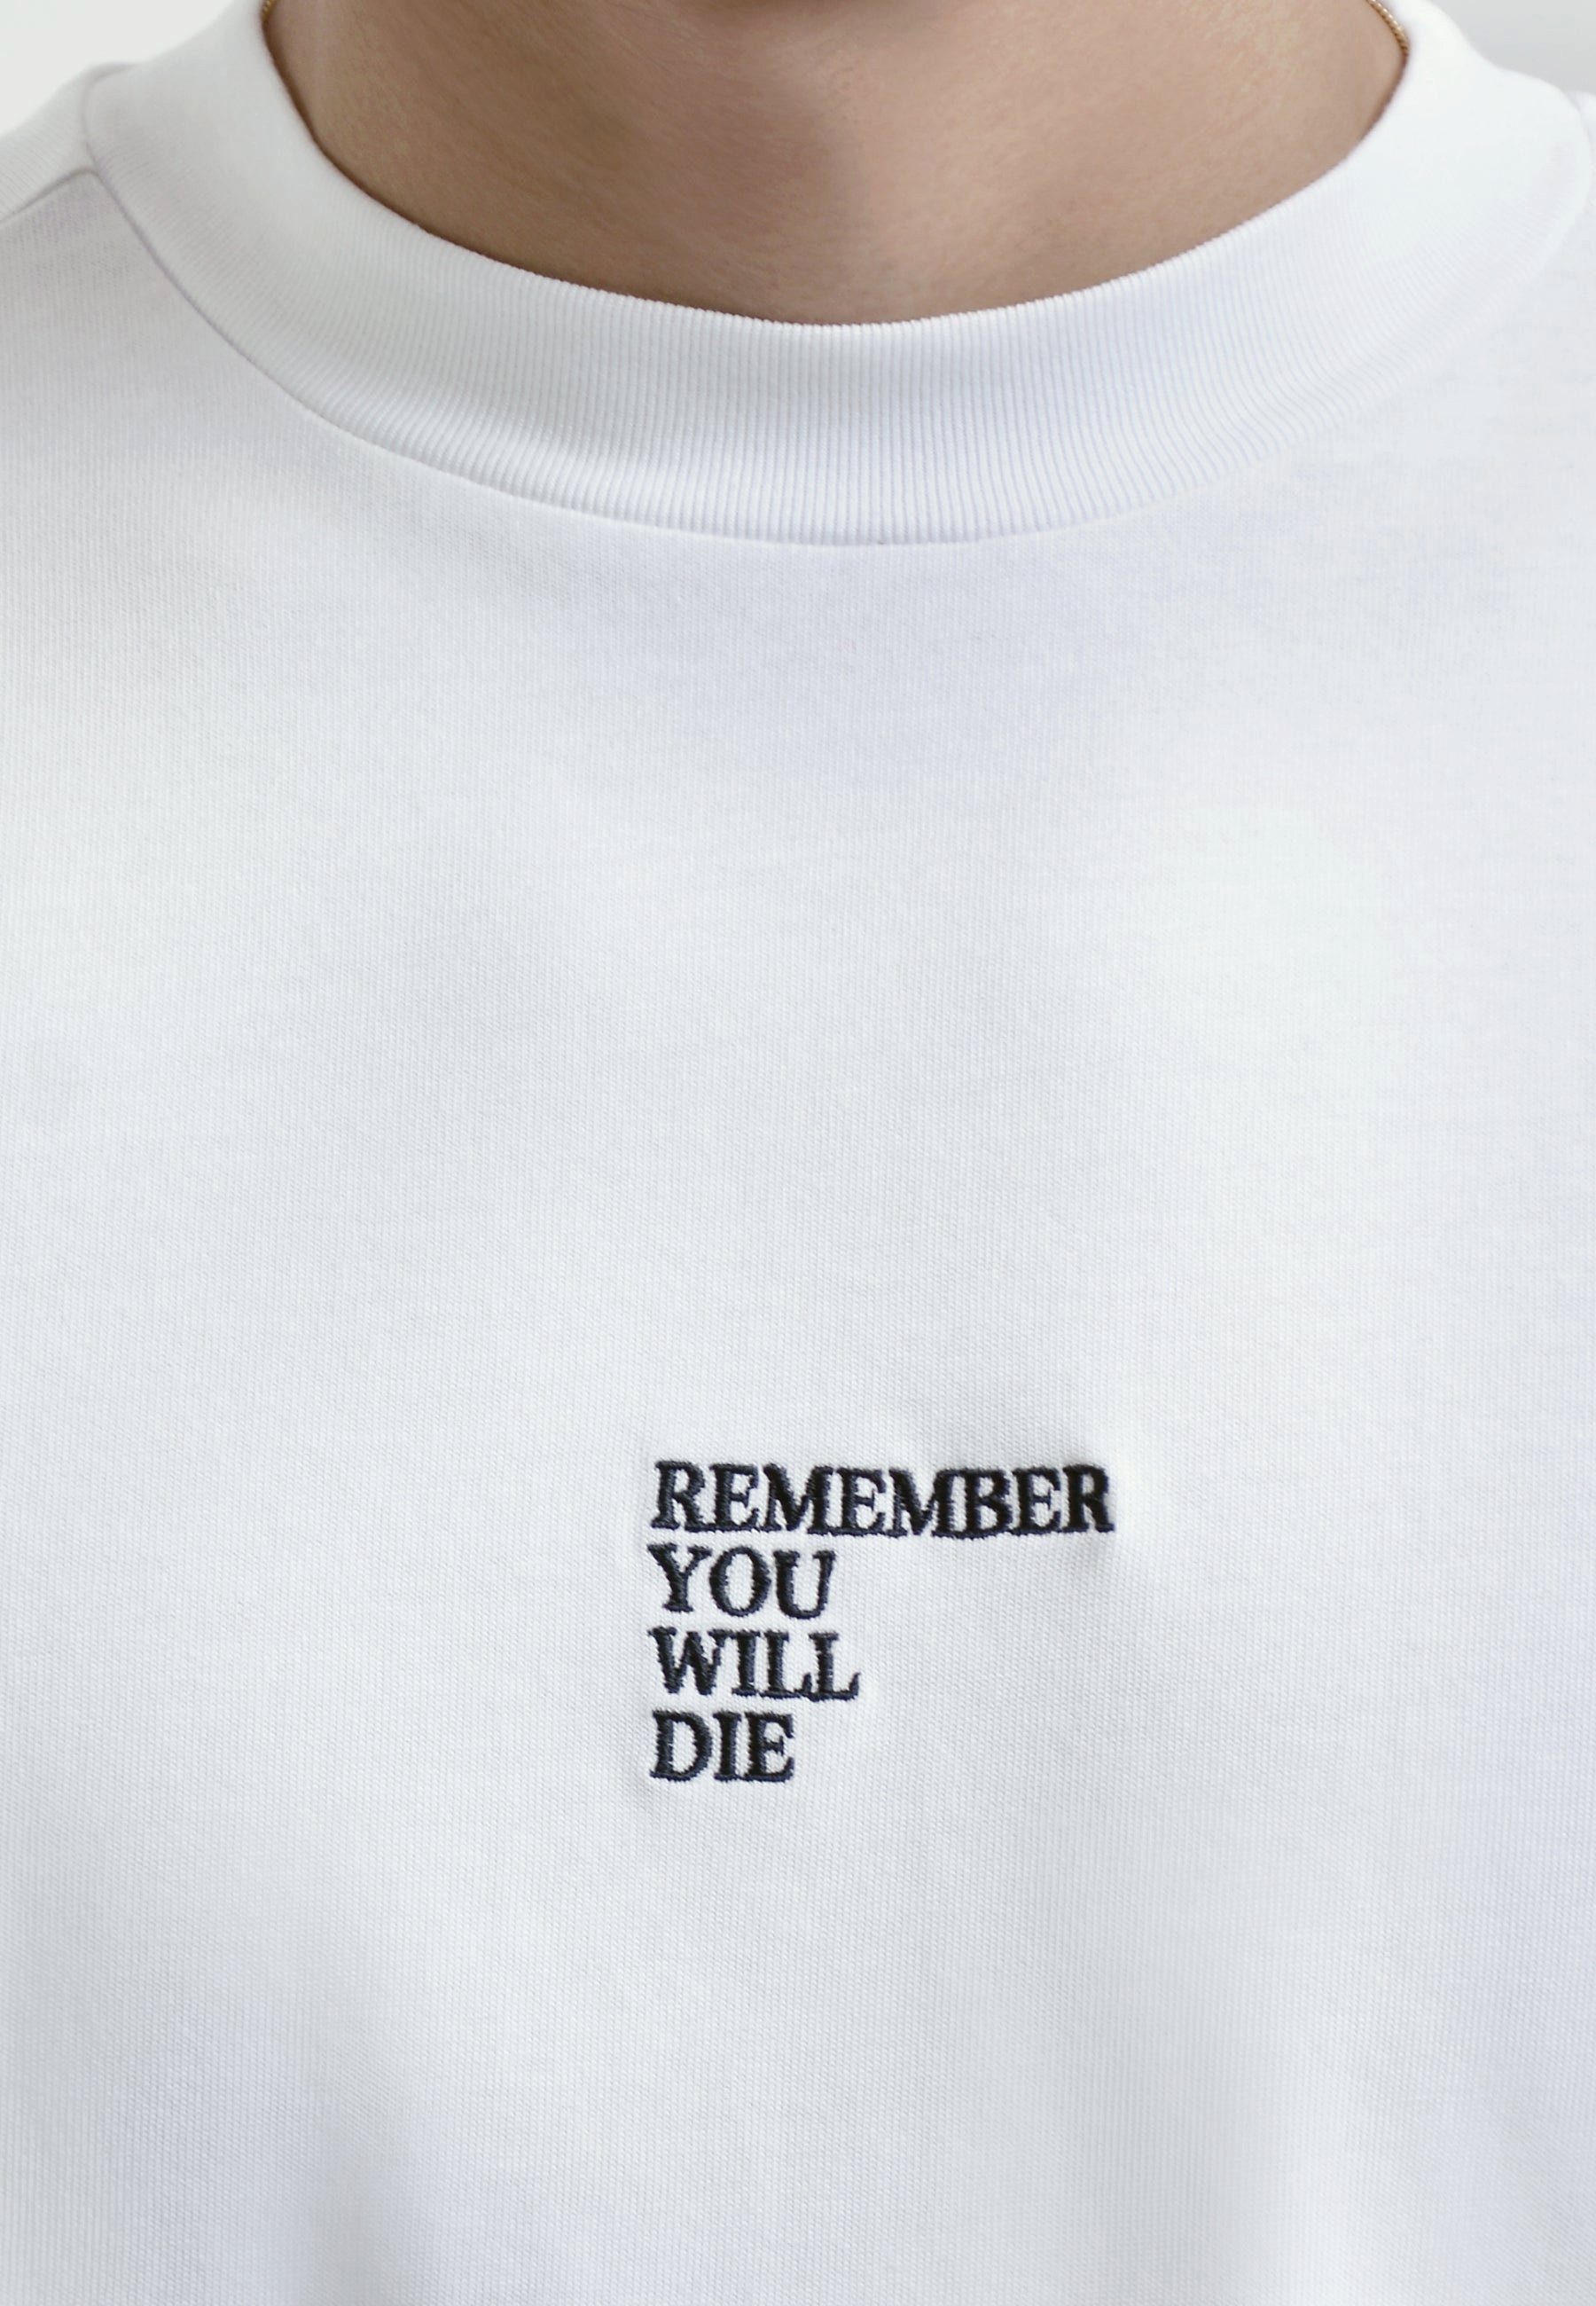 RYWD Time T-Shirt - T-Shirt will die you Remember